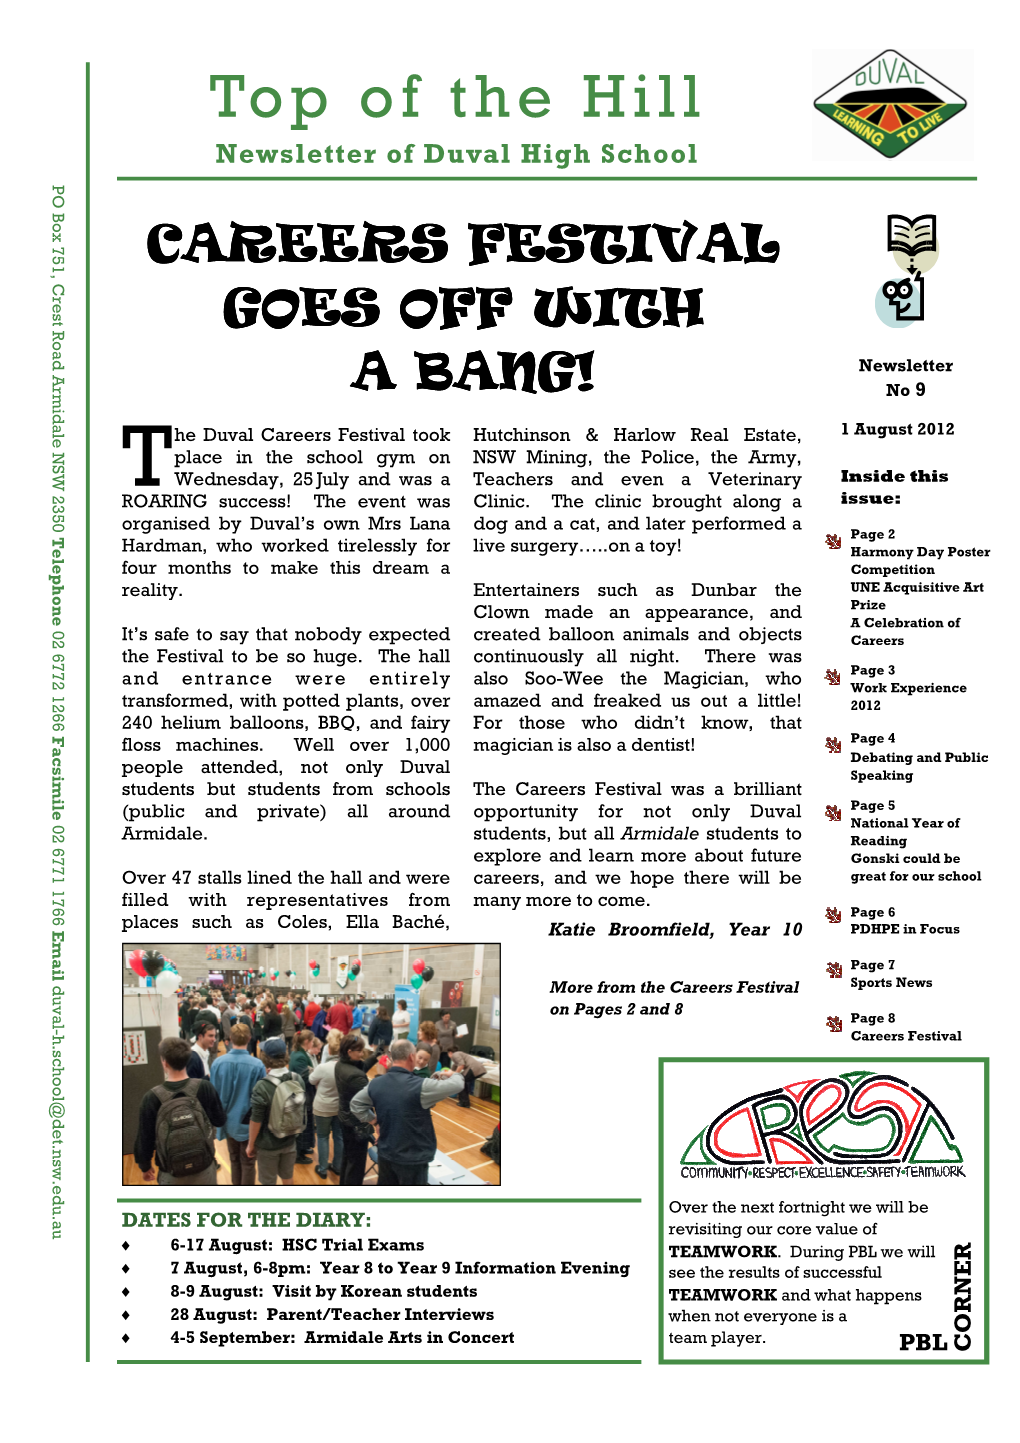 Newsletter of Duval High School PO Box 751, Crest Road Armidale NSW 2350 2350 NSW Armidale Road Crest 751, Box PO CAREERS FESTIVAL GOES OFF WITH